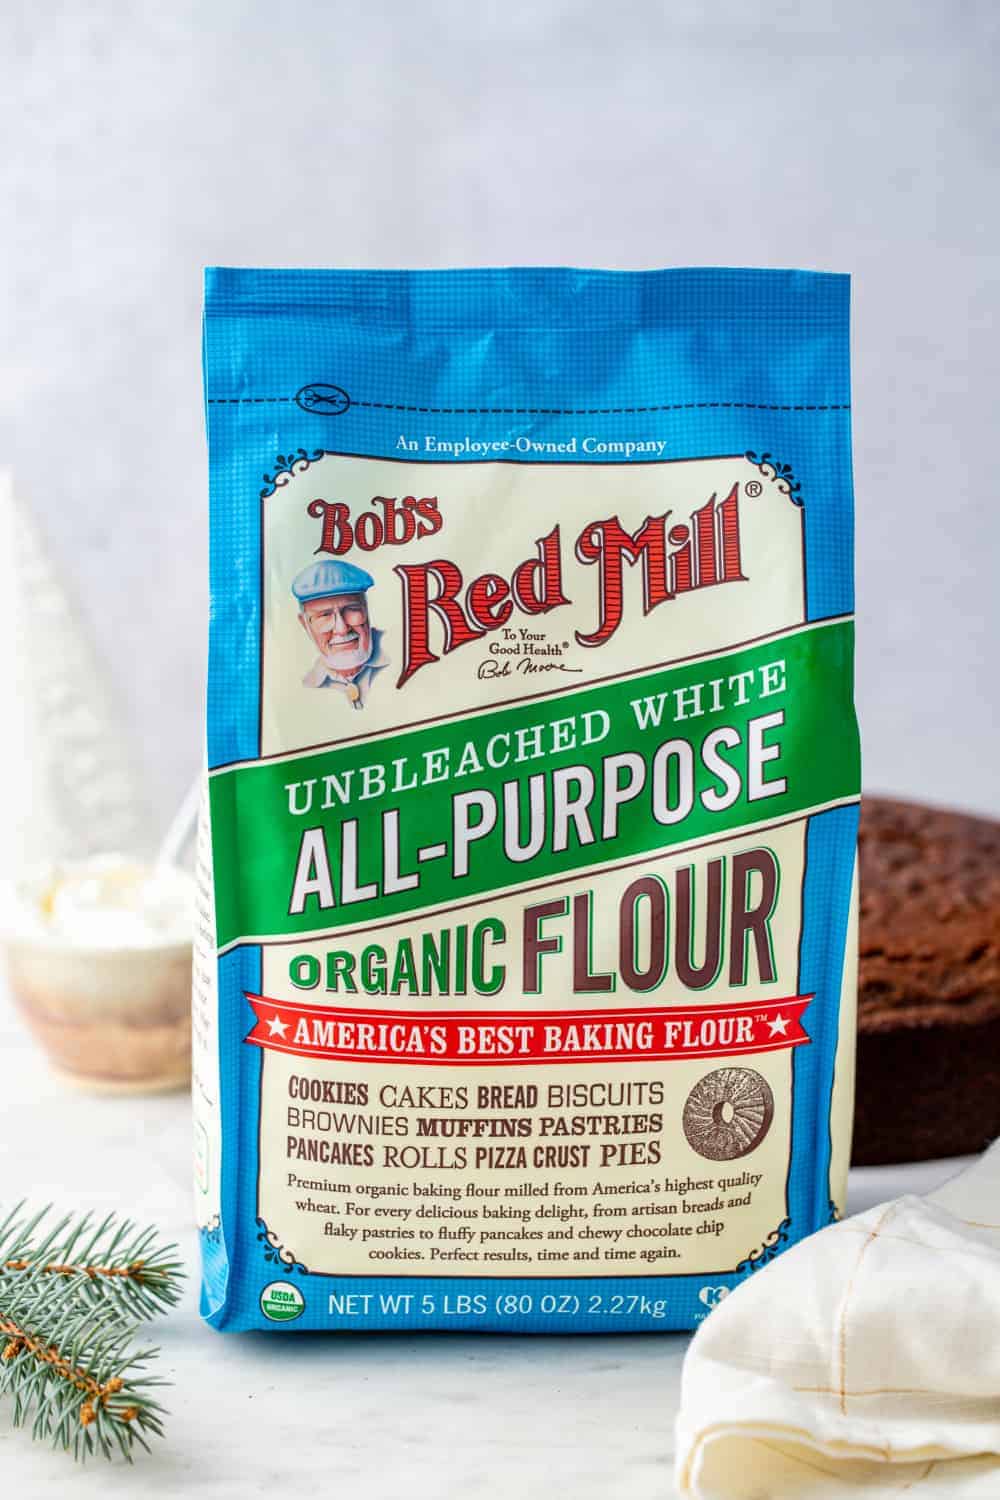 Bag of all-purpose flour in the foreground with gingerbread cake in the background